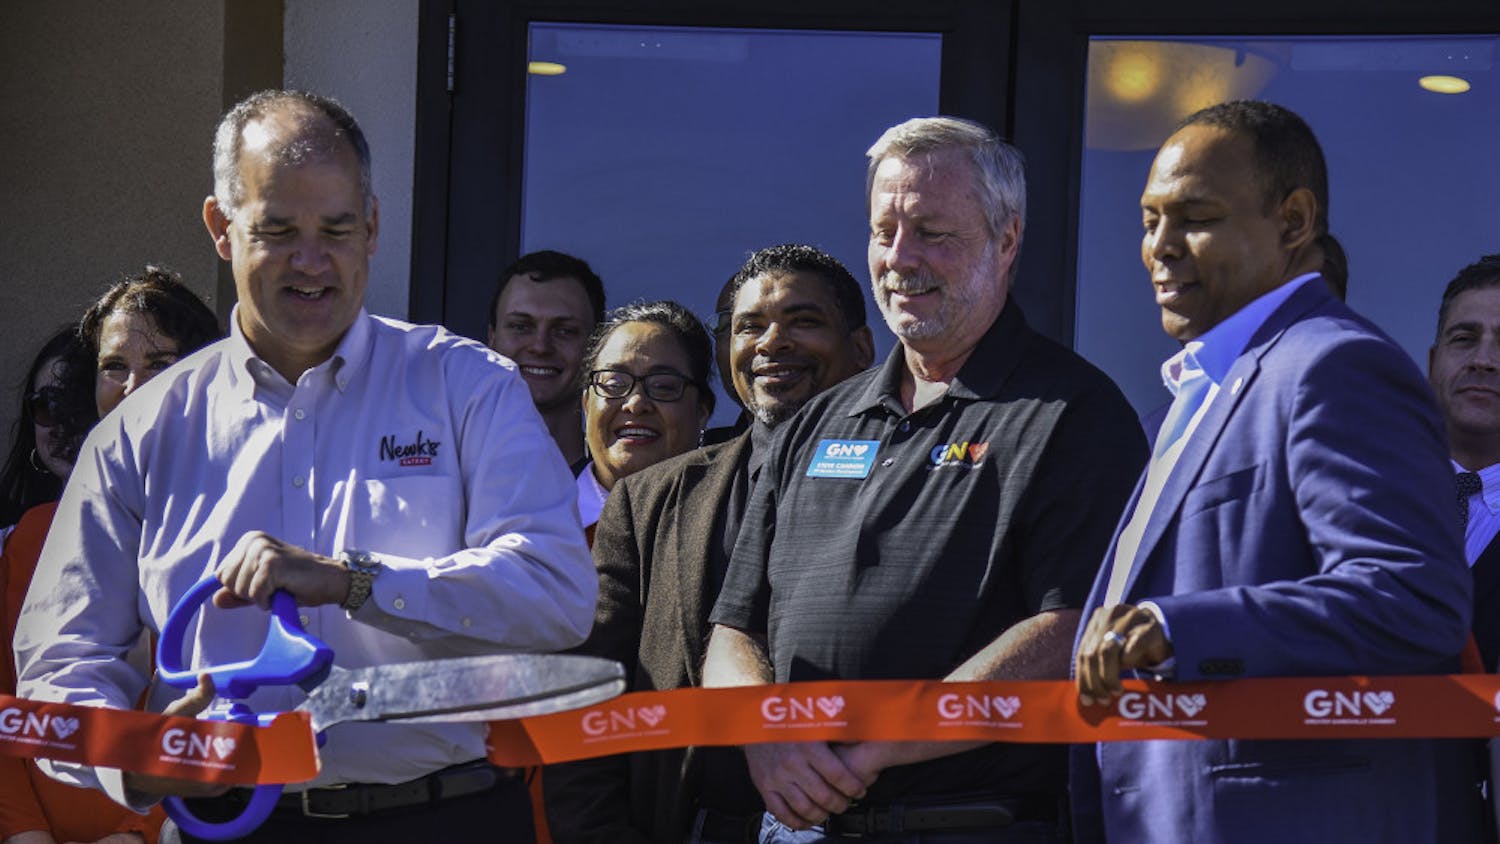 After over a year of anticipation, Newk’s Grand Opening Celebration was held Friday. The event featured a ribbon-cuting ceremony with the Chamber of Commerce, free giveaways and performances from UF cheerleaders along with UF mascots Albert and Alberta.